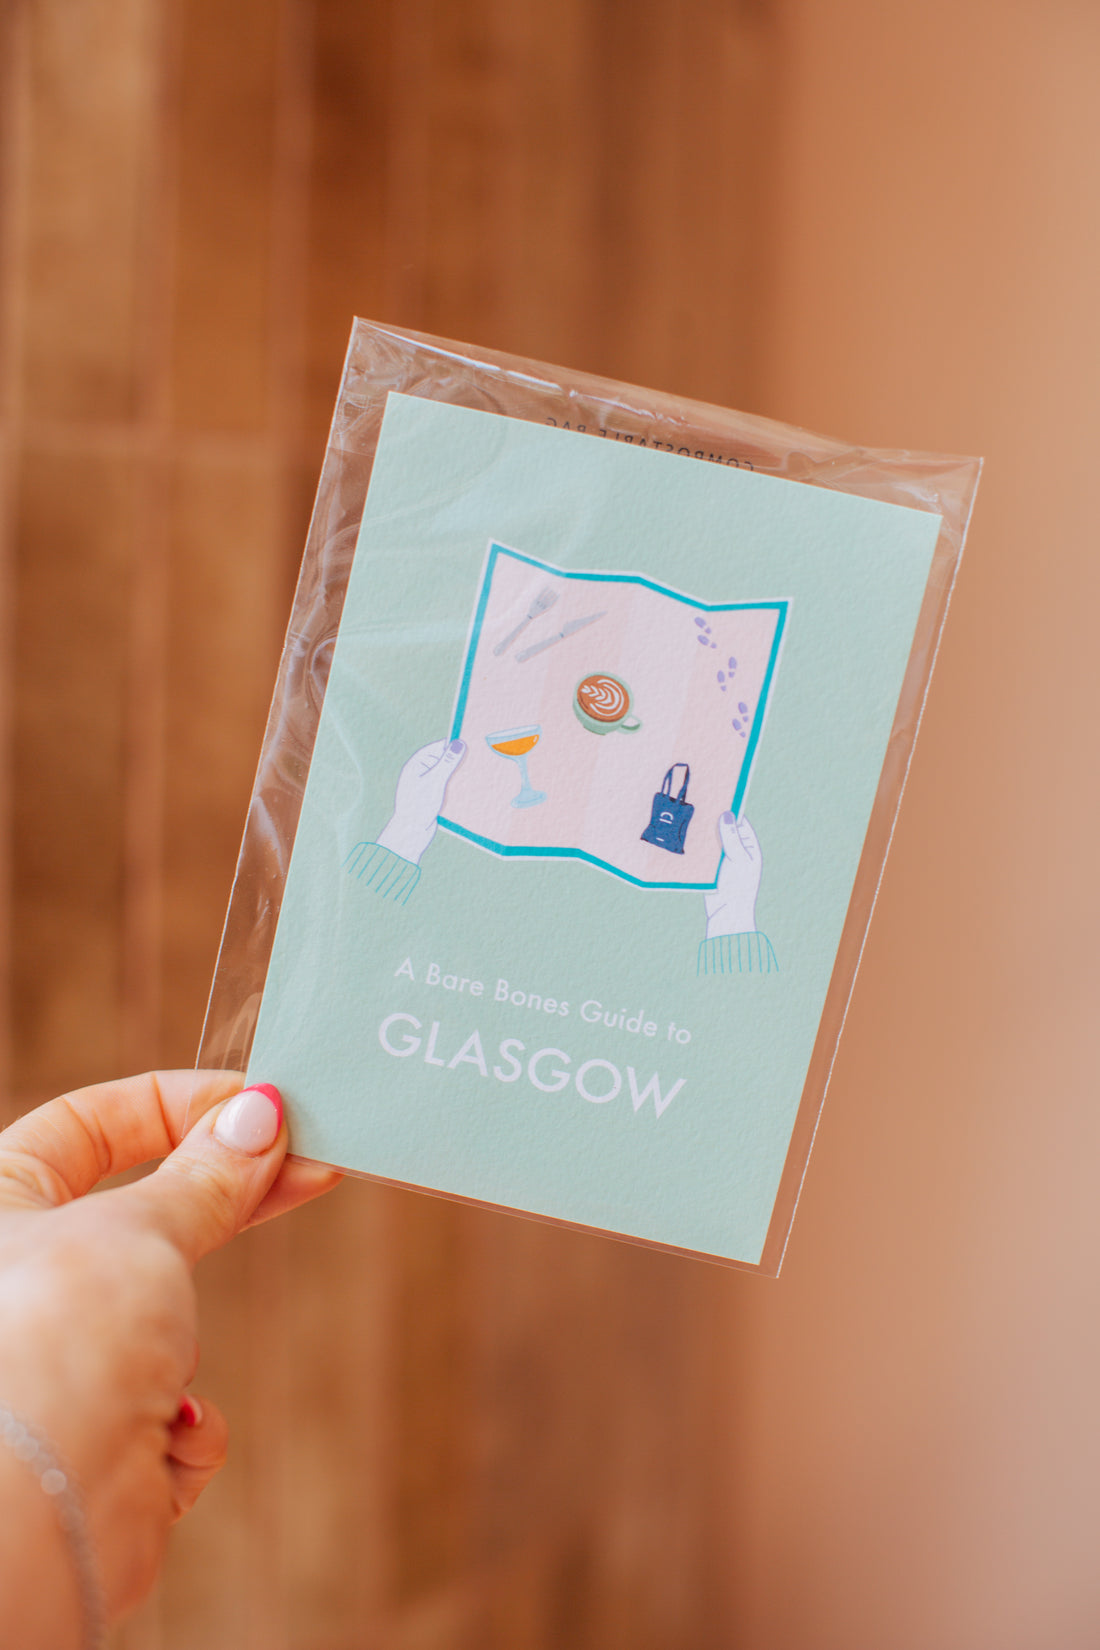 A Bare Bones Guide to Glasgow Postcard for Digital Map